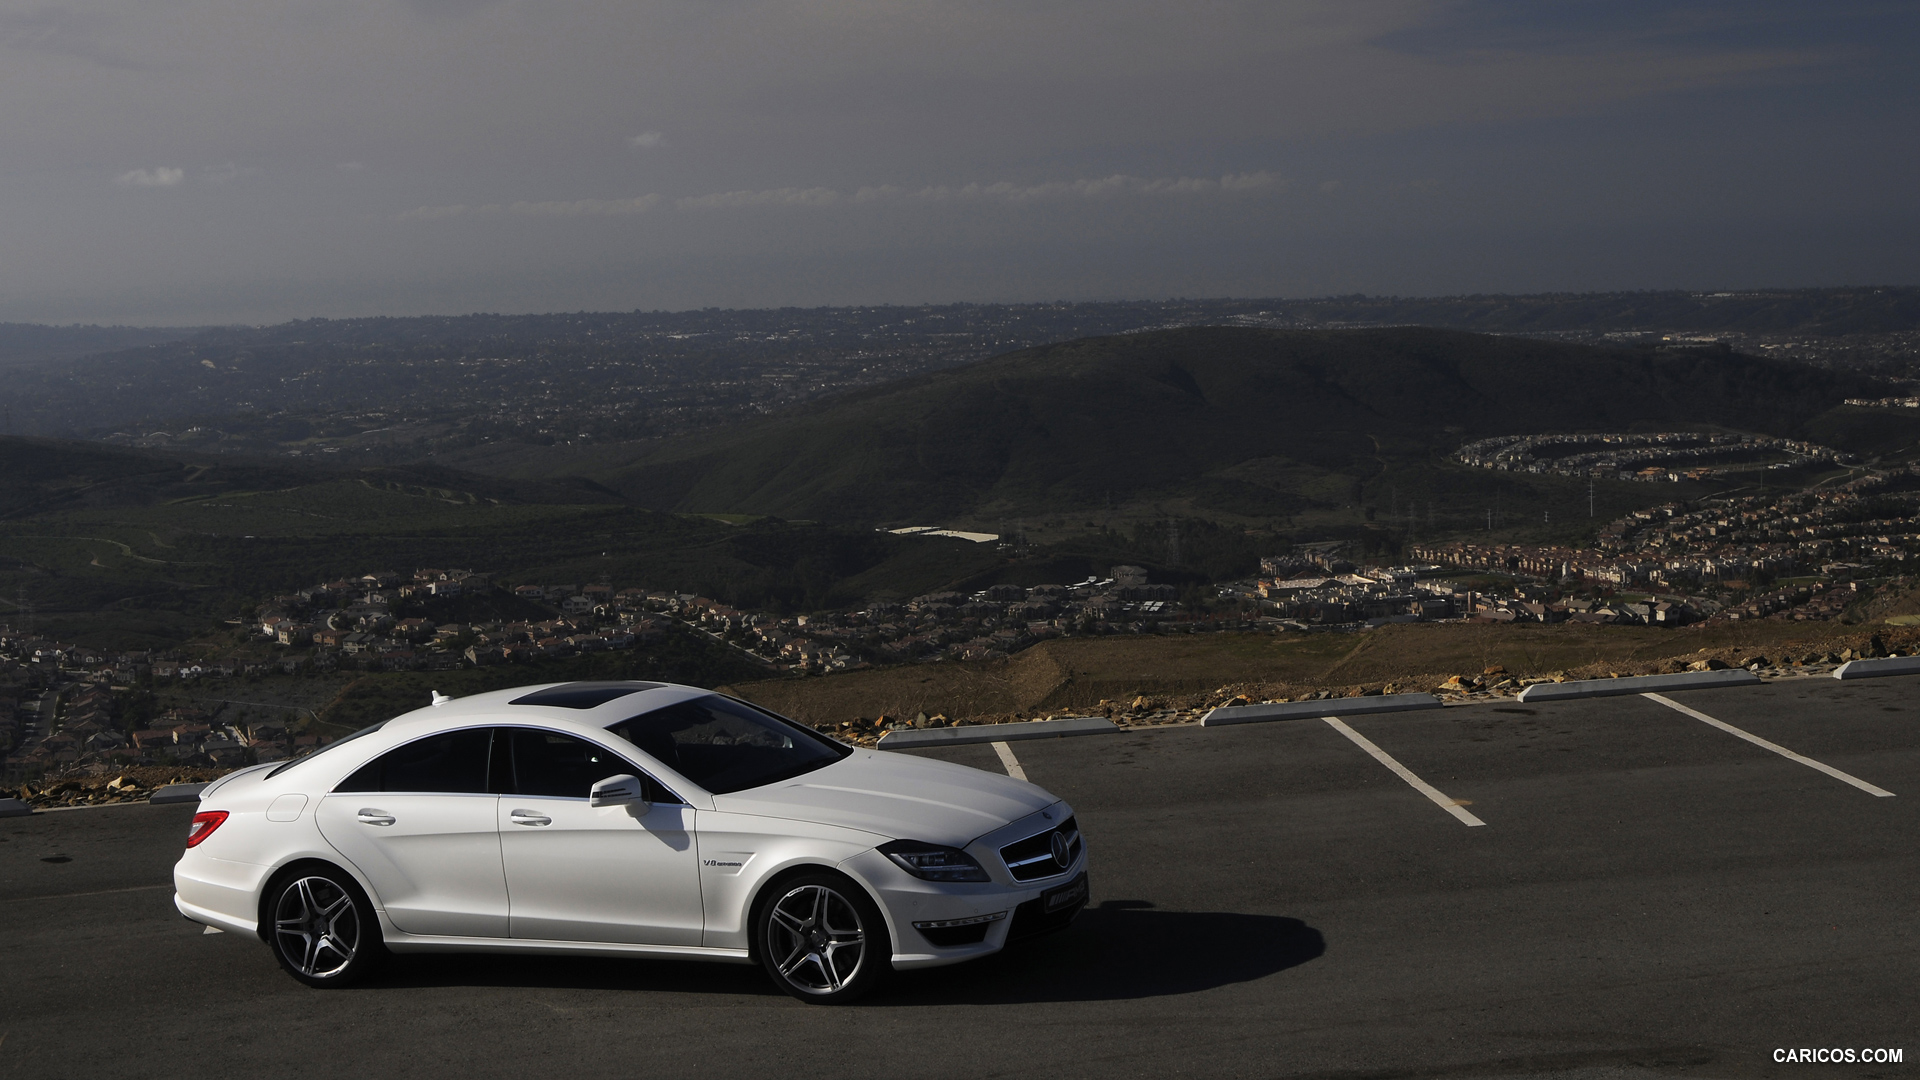 Mercedes-Benz CLS63 AMG (2012) US-Version - Diamond White - Side, #26 of 100